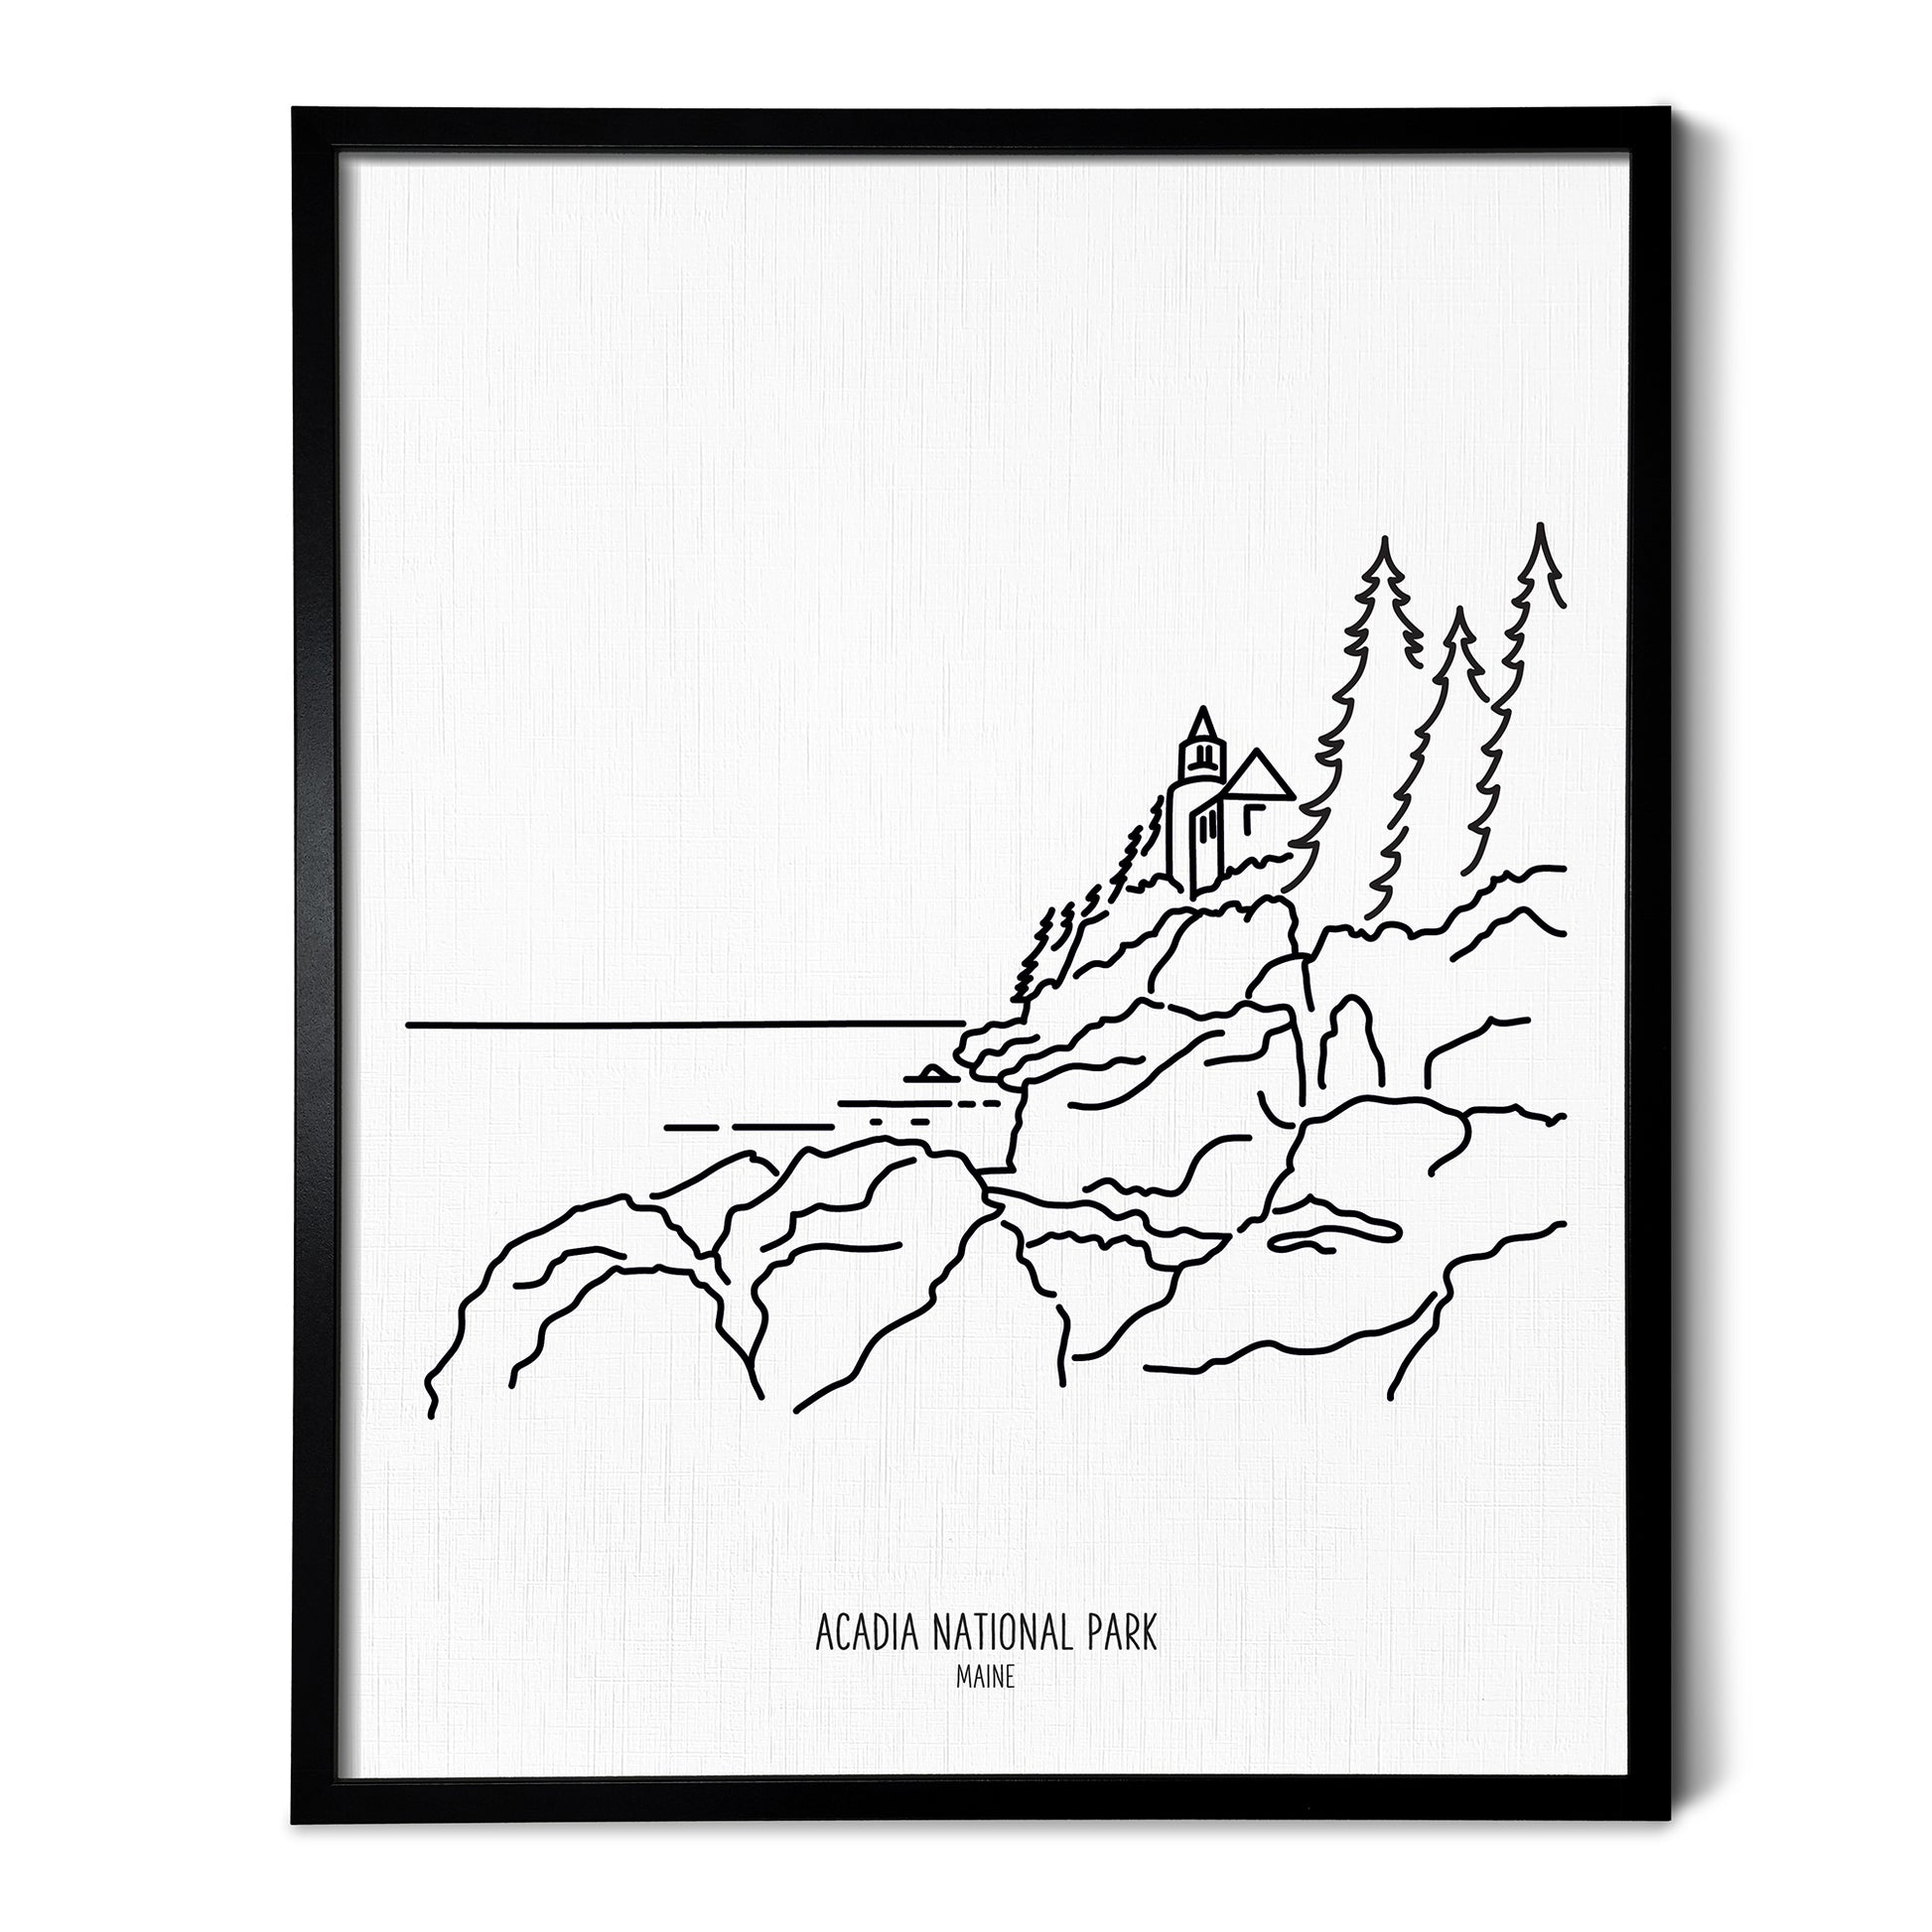 A line art drawing of Acadia National Park on white linen paper in a thin black picture frame